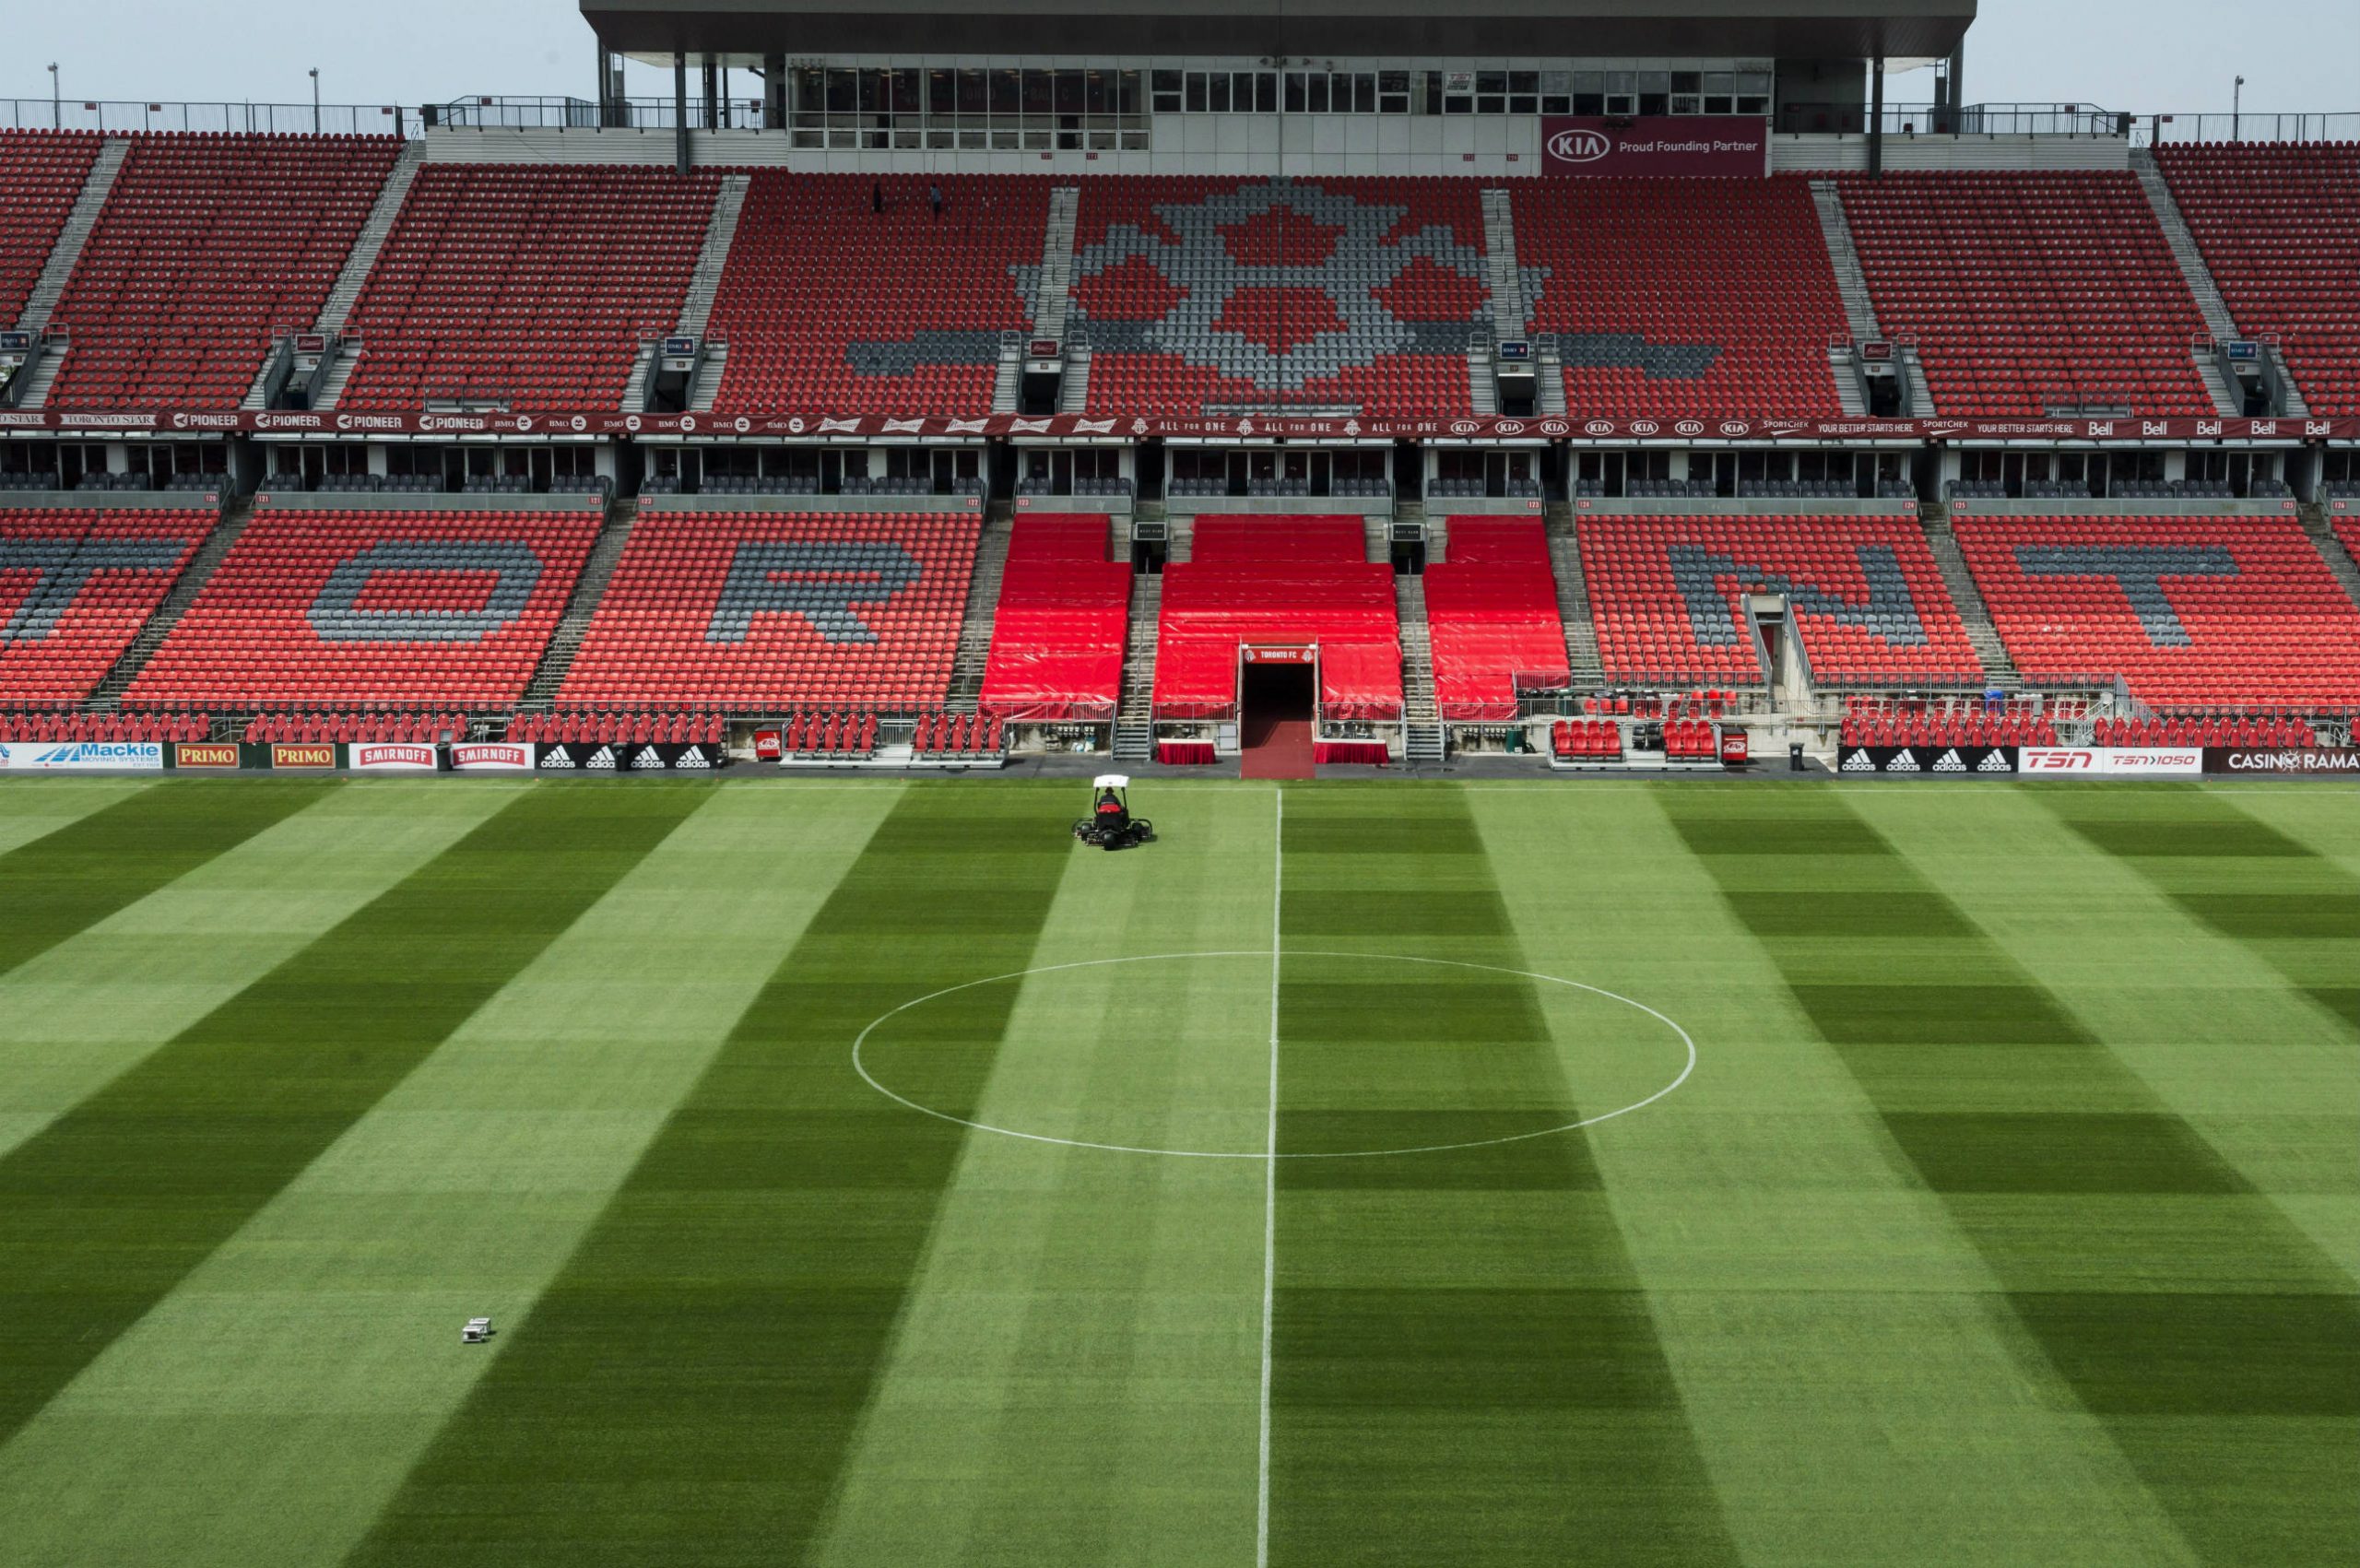 BMO-Field-in-Toronto-is-pictured-on-Wednesday,-June-13,-2018.-FIFA's-member-associations-voted-134-to-65,-with-one-no-vote,-Wednesday-in-favour-of-the-joint-North-American-bid-by-Canada,-the-U.S.-and-Mexico-to-host-the-2026-World-Cup-over-that-of-Morocco-at-the-FIFA-Congress-in-Moscow.-(Christopher-Katsarov/CP)